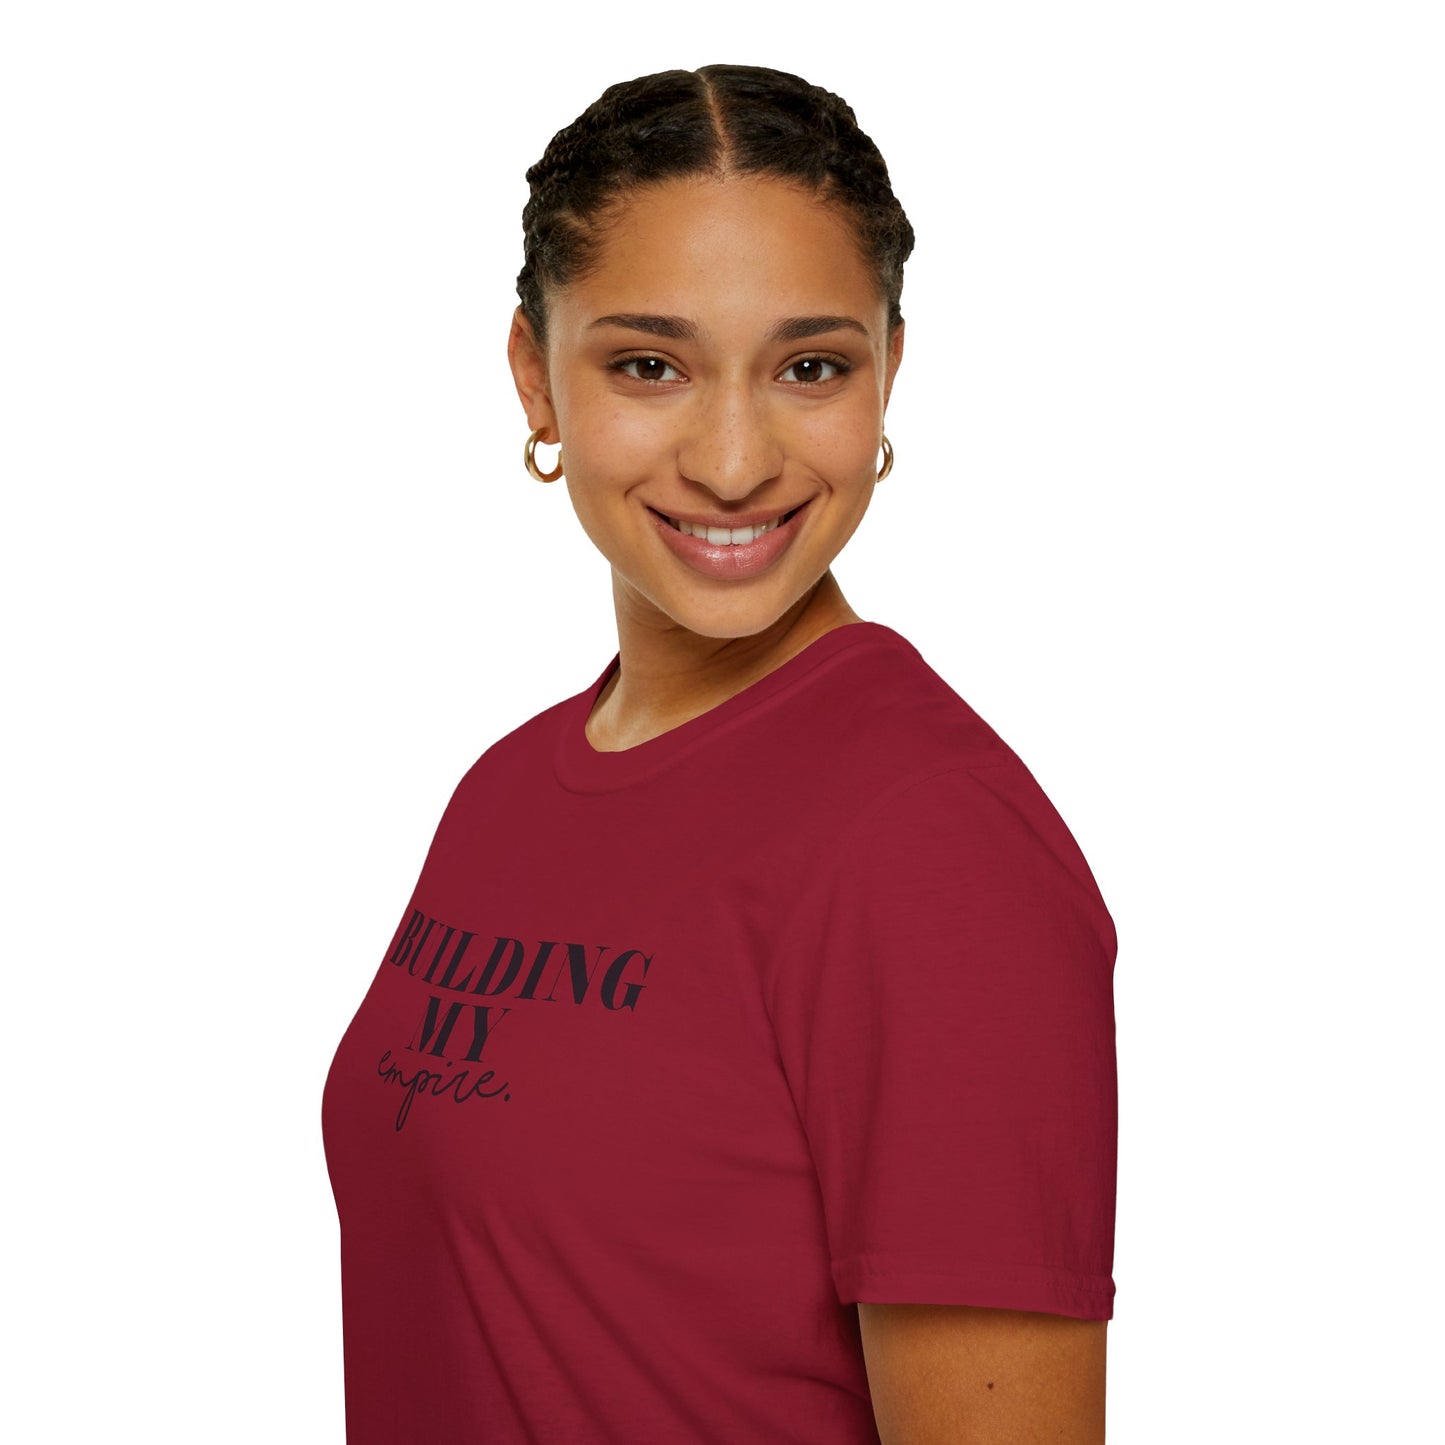 Inspirational (Building My Empire/ Unisex Softstyle T-Shirt)